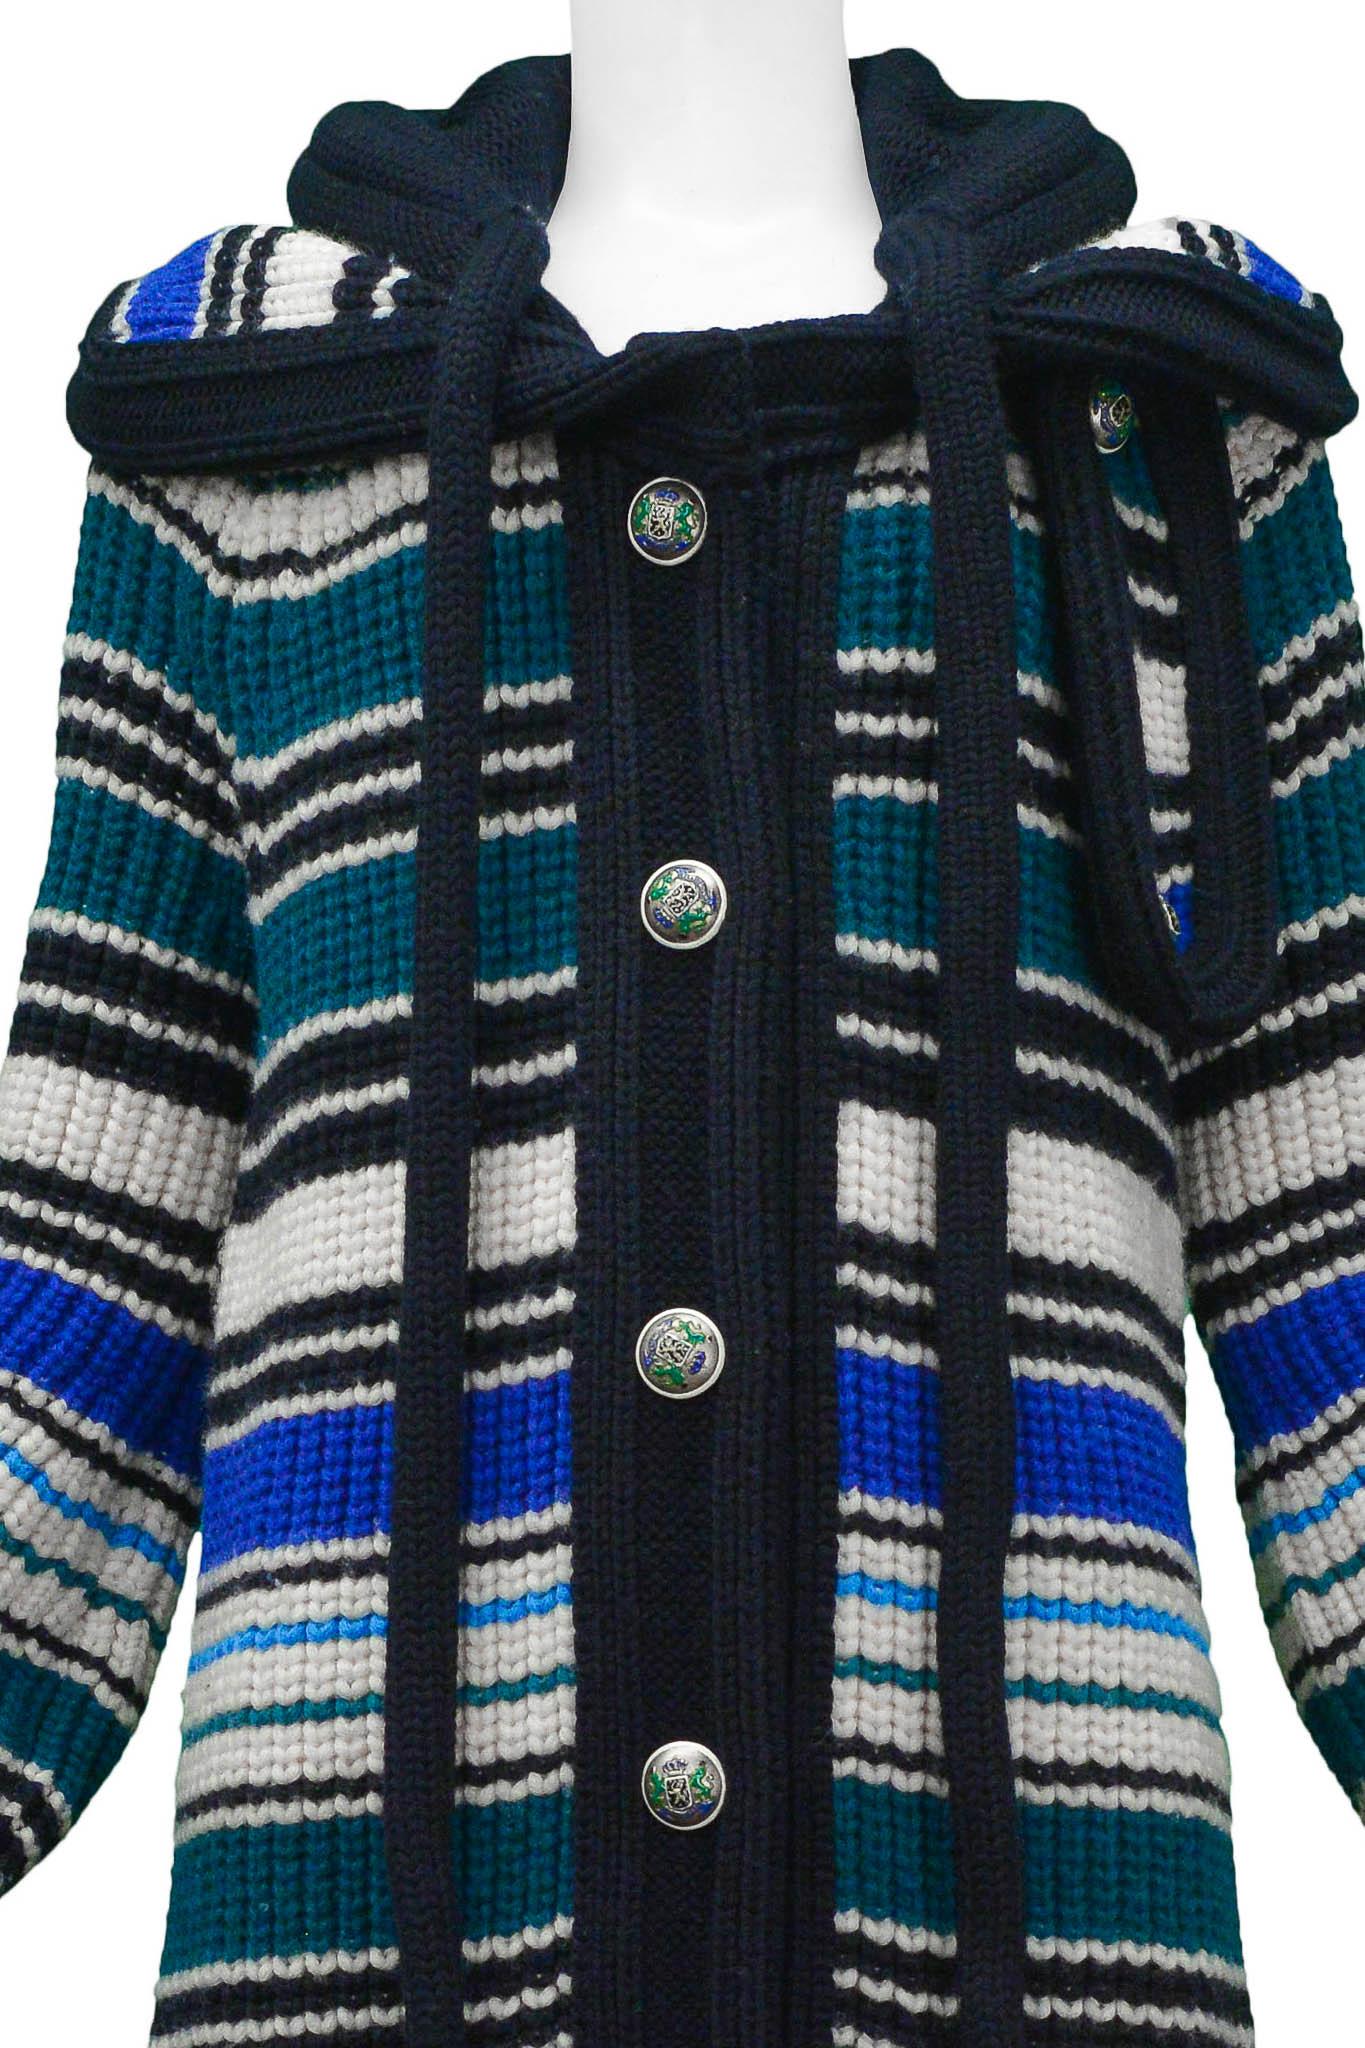 Balenciaga 2007 Blue White & Green Striped Heavy Knit Hooded Sweater In Excellent Condition For Sale In Los Angeles, CA